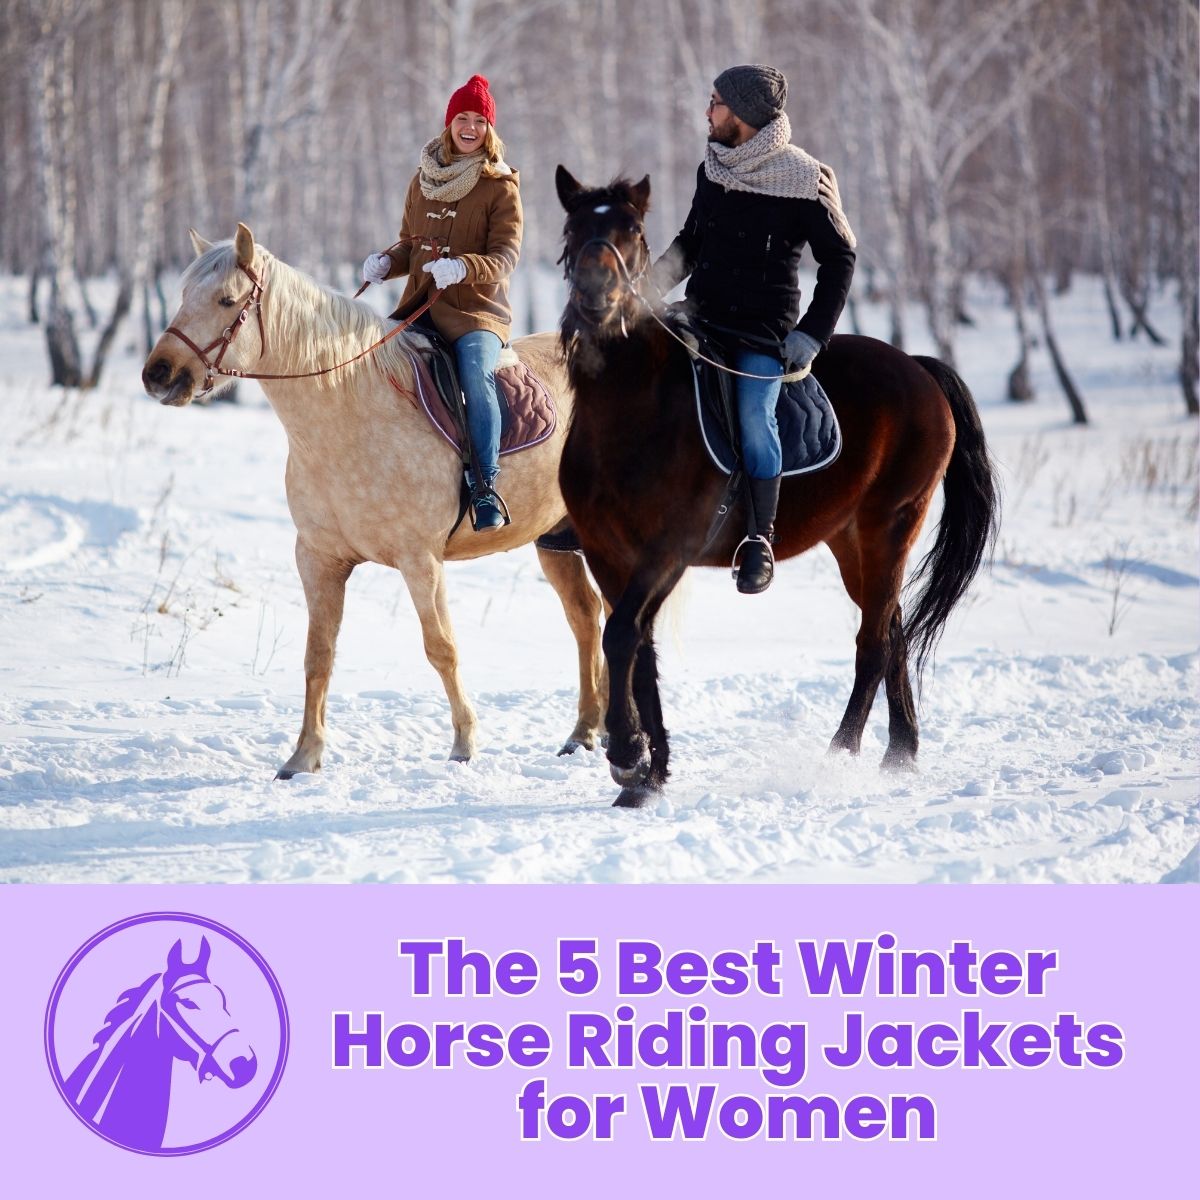 You are currently viewing The 5 Best Winter Horse Riding Jackets for Women